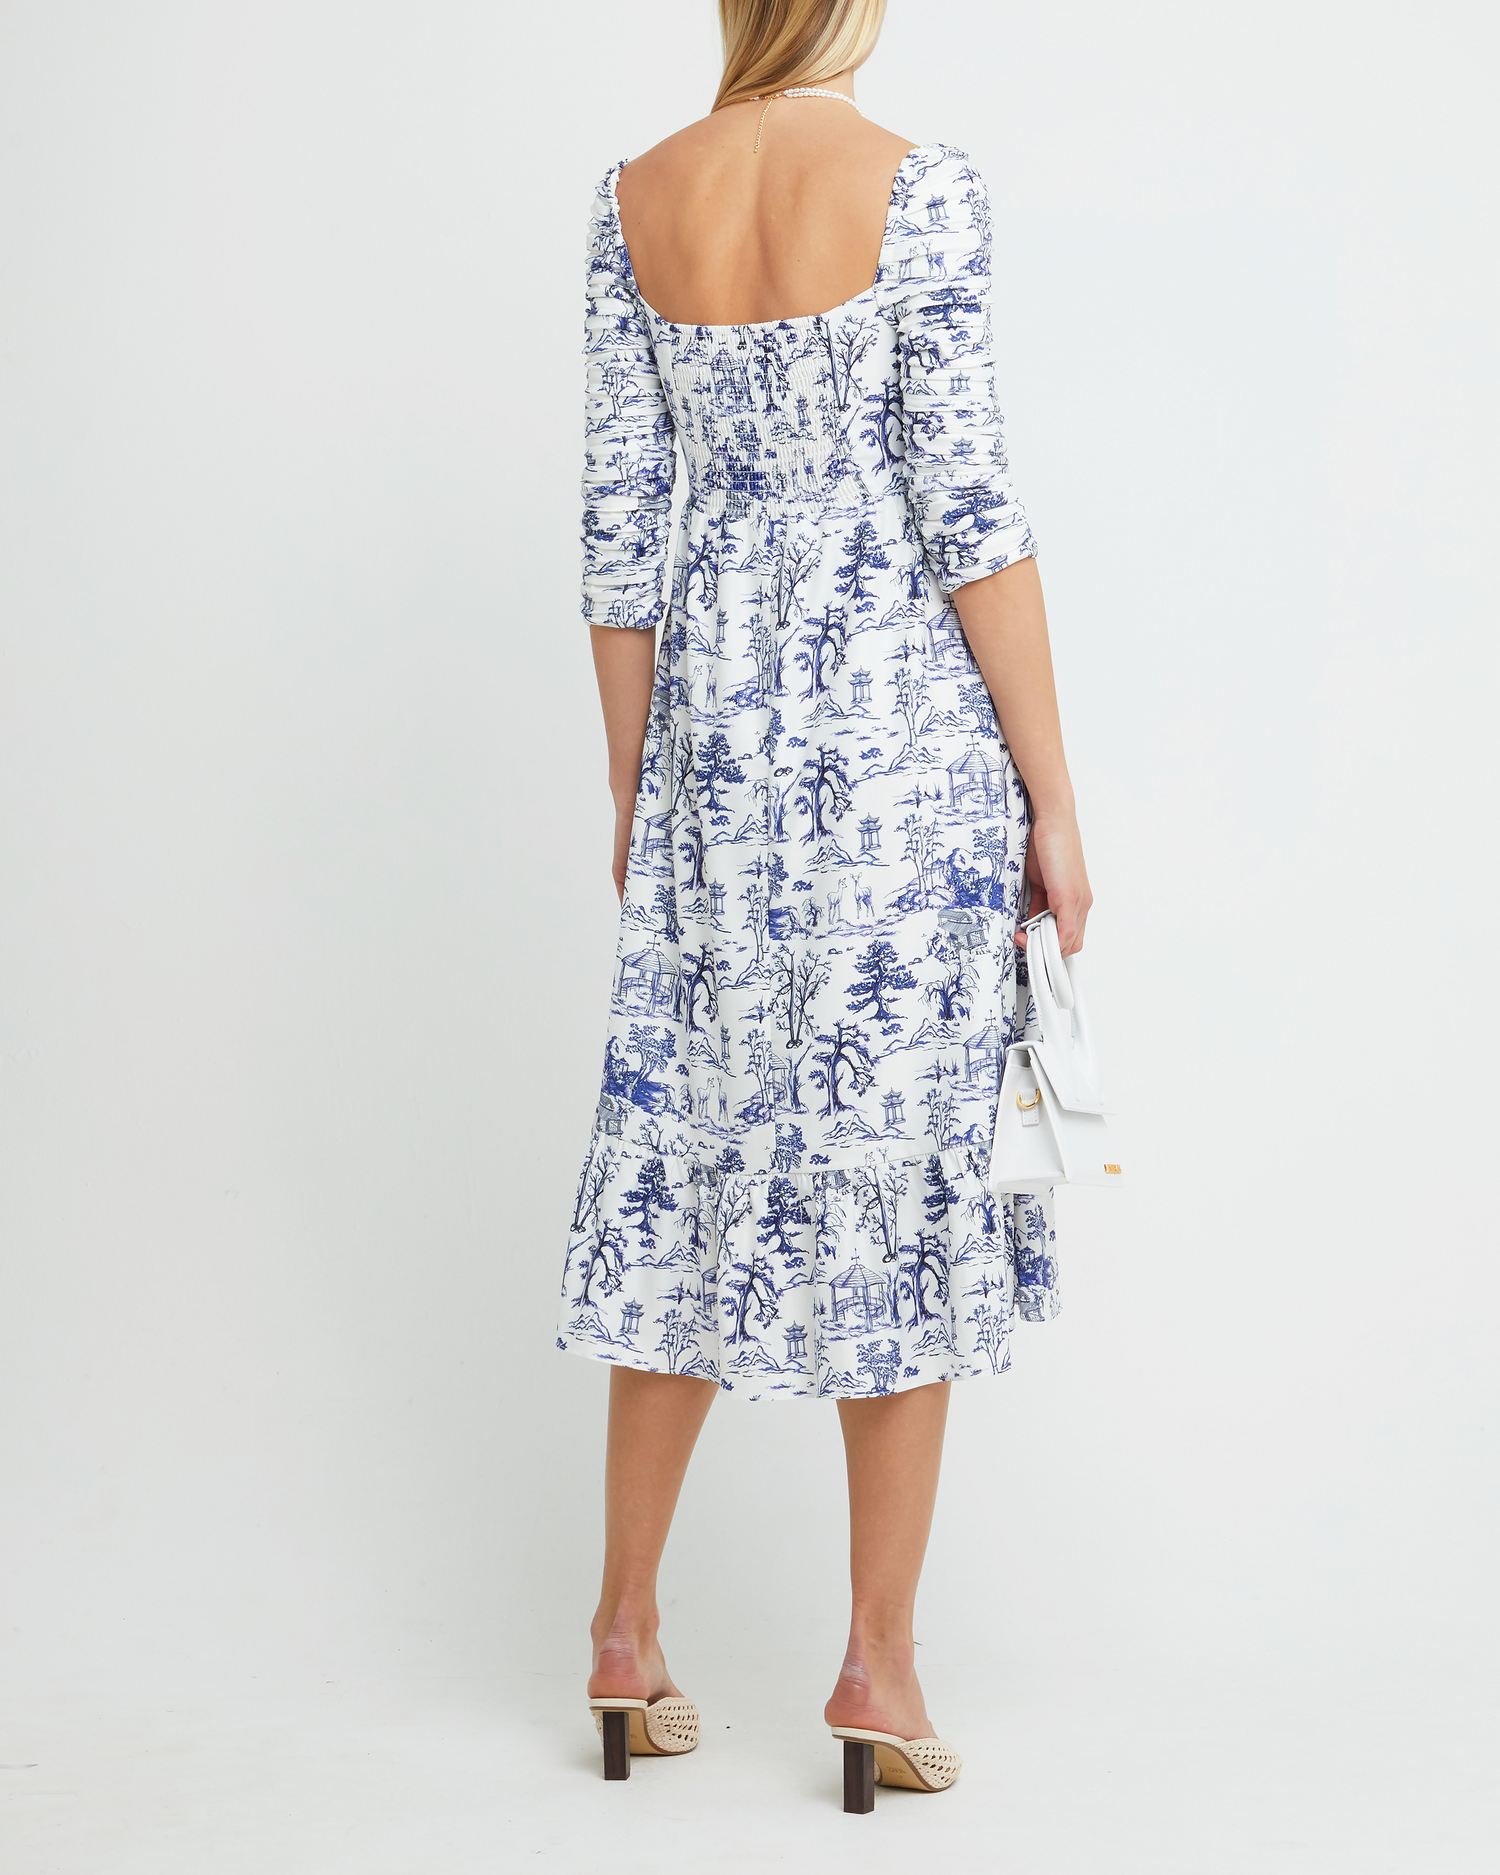 Second image of Bonnie Dress, a blue midi dress, toile, pockets, ruched sleeves, square neckline, long sleeves, 3/4 sleeves